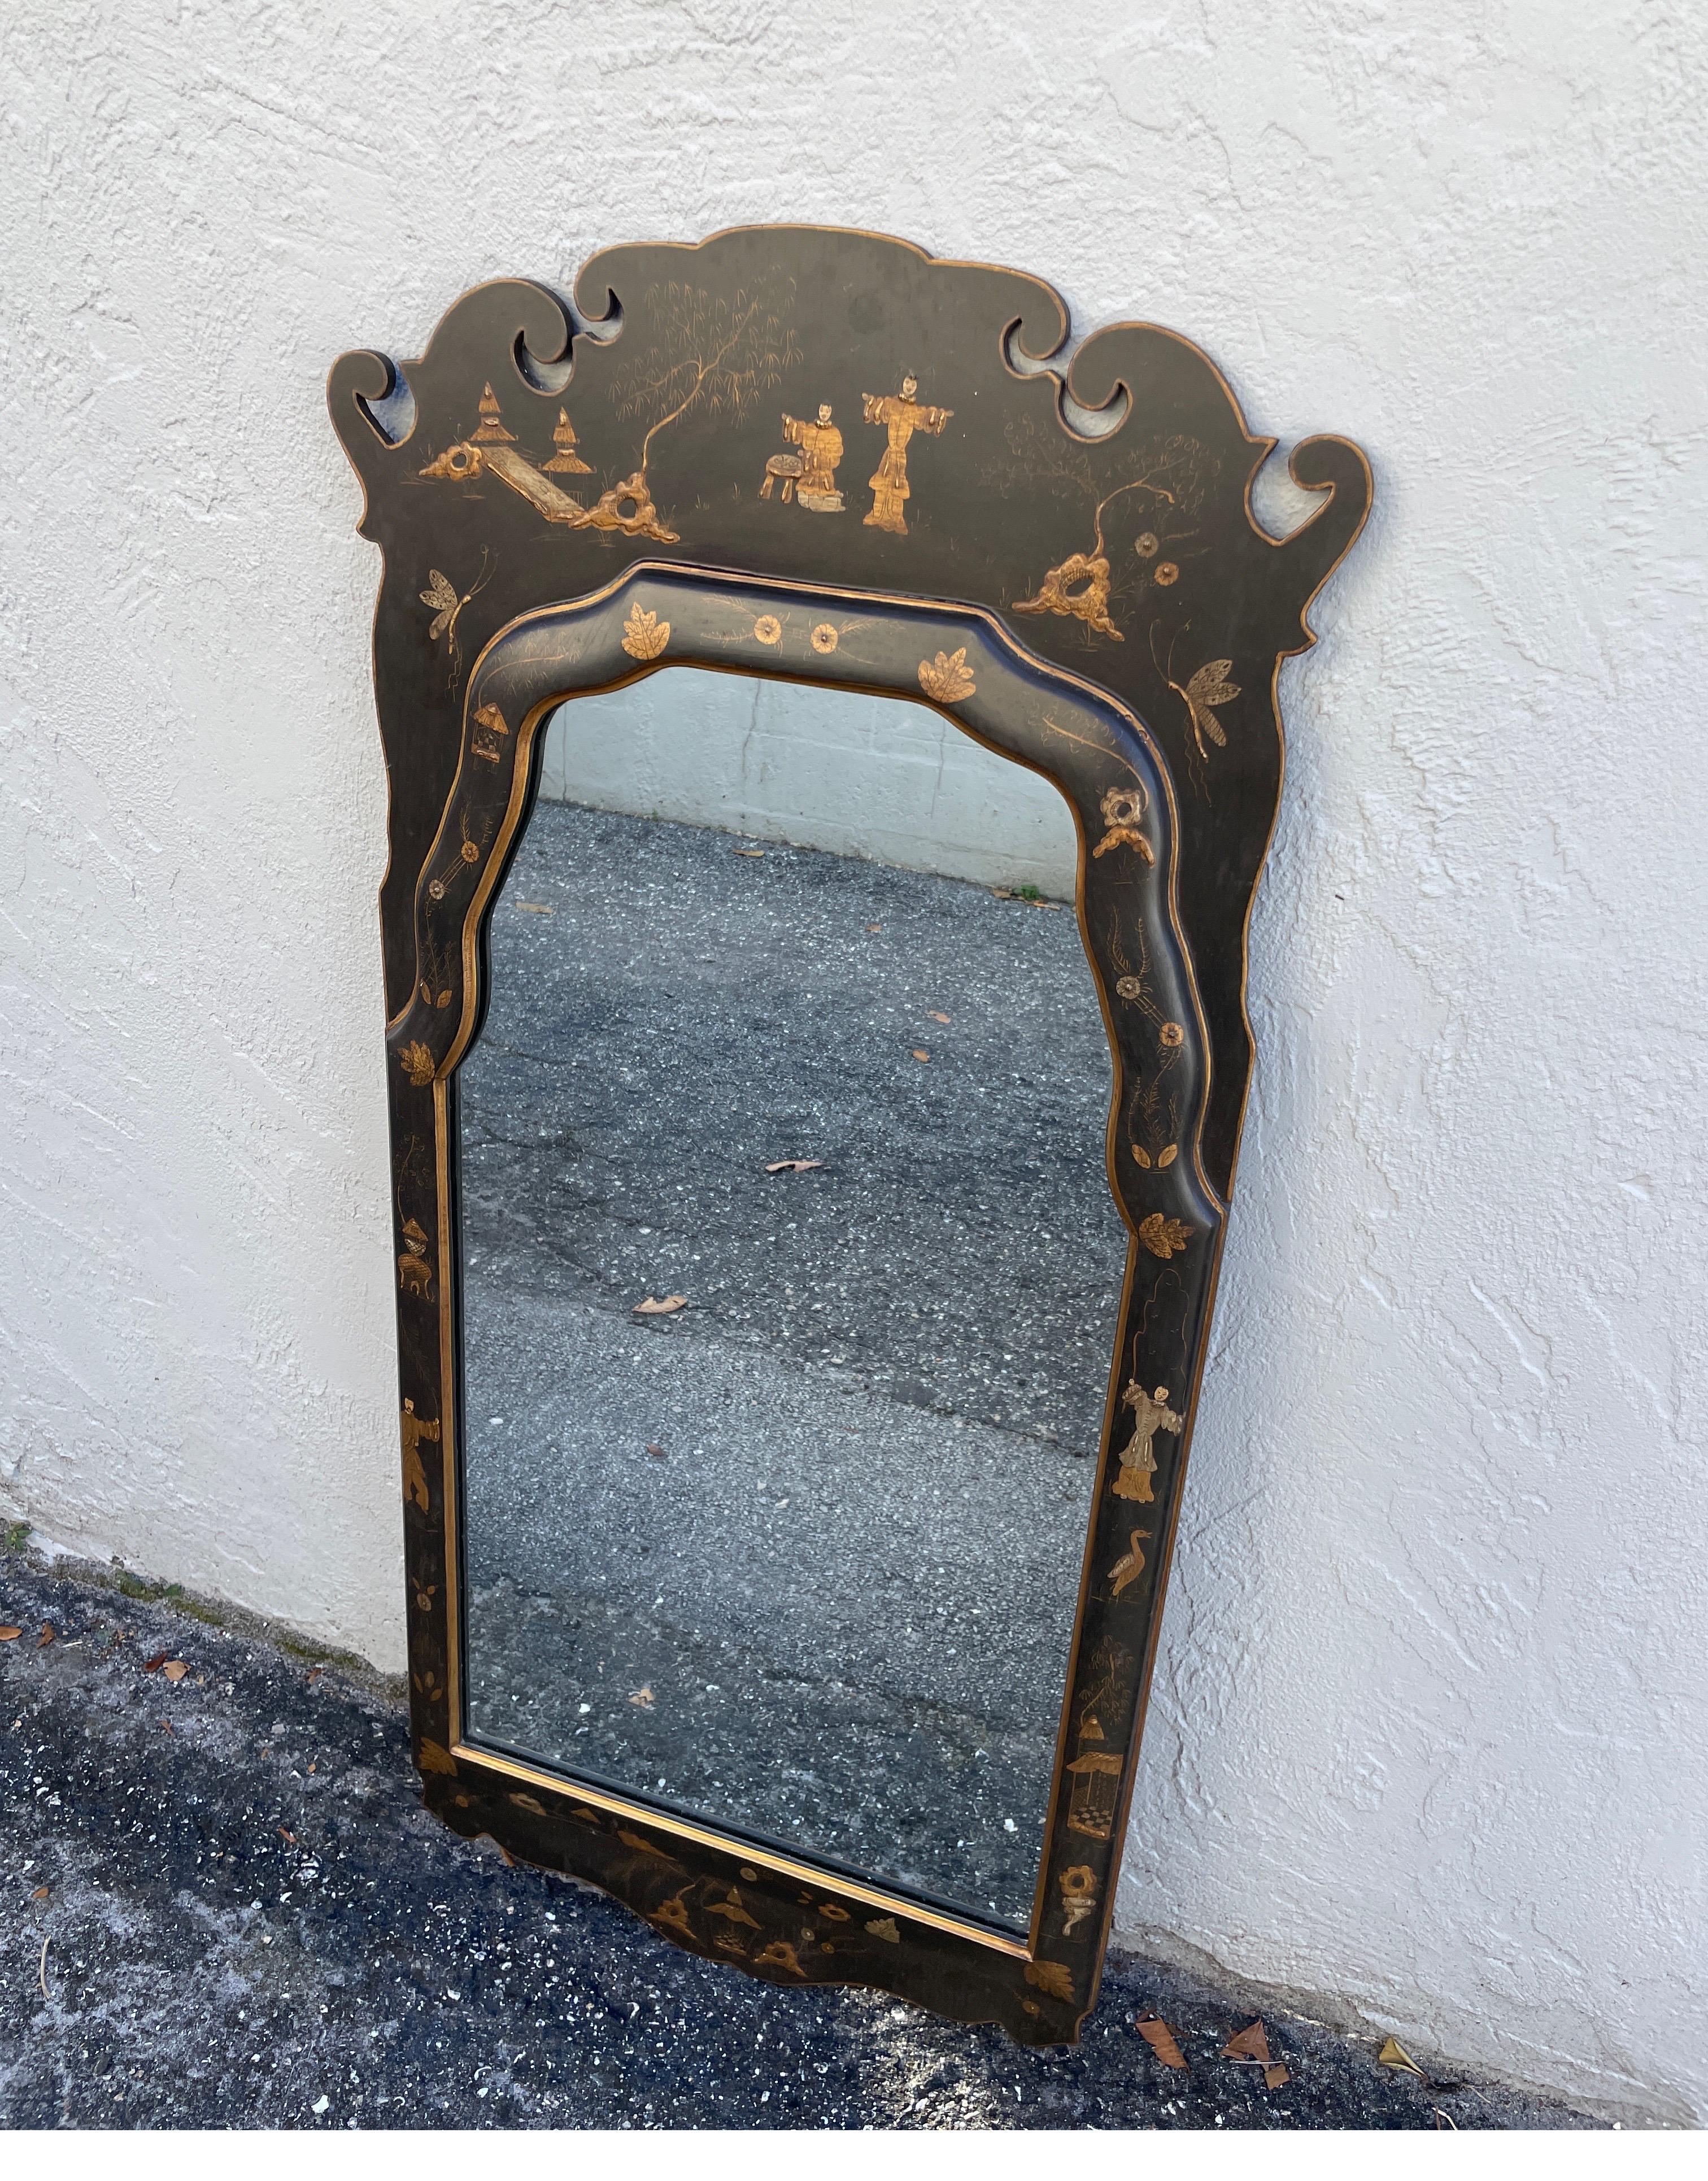 Vintage hand painted black and gold chinoiserie mirror.